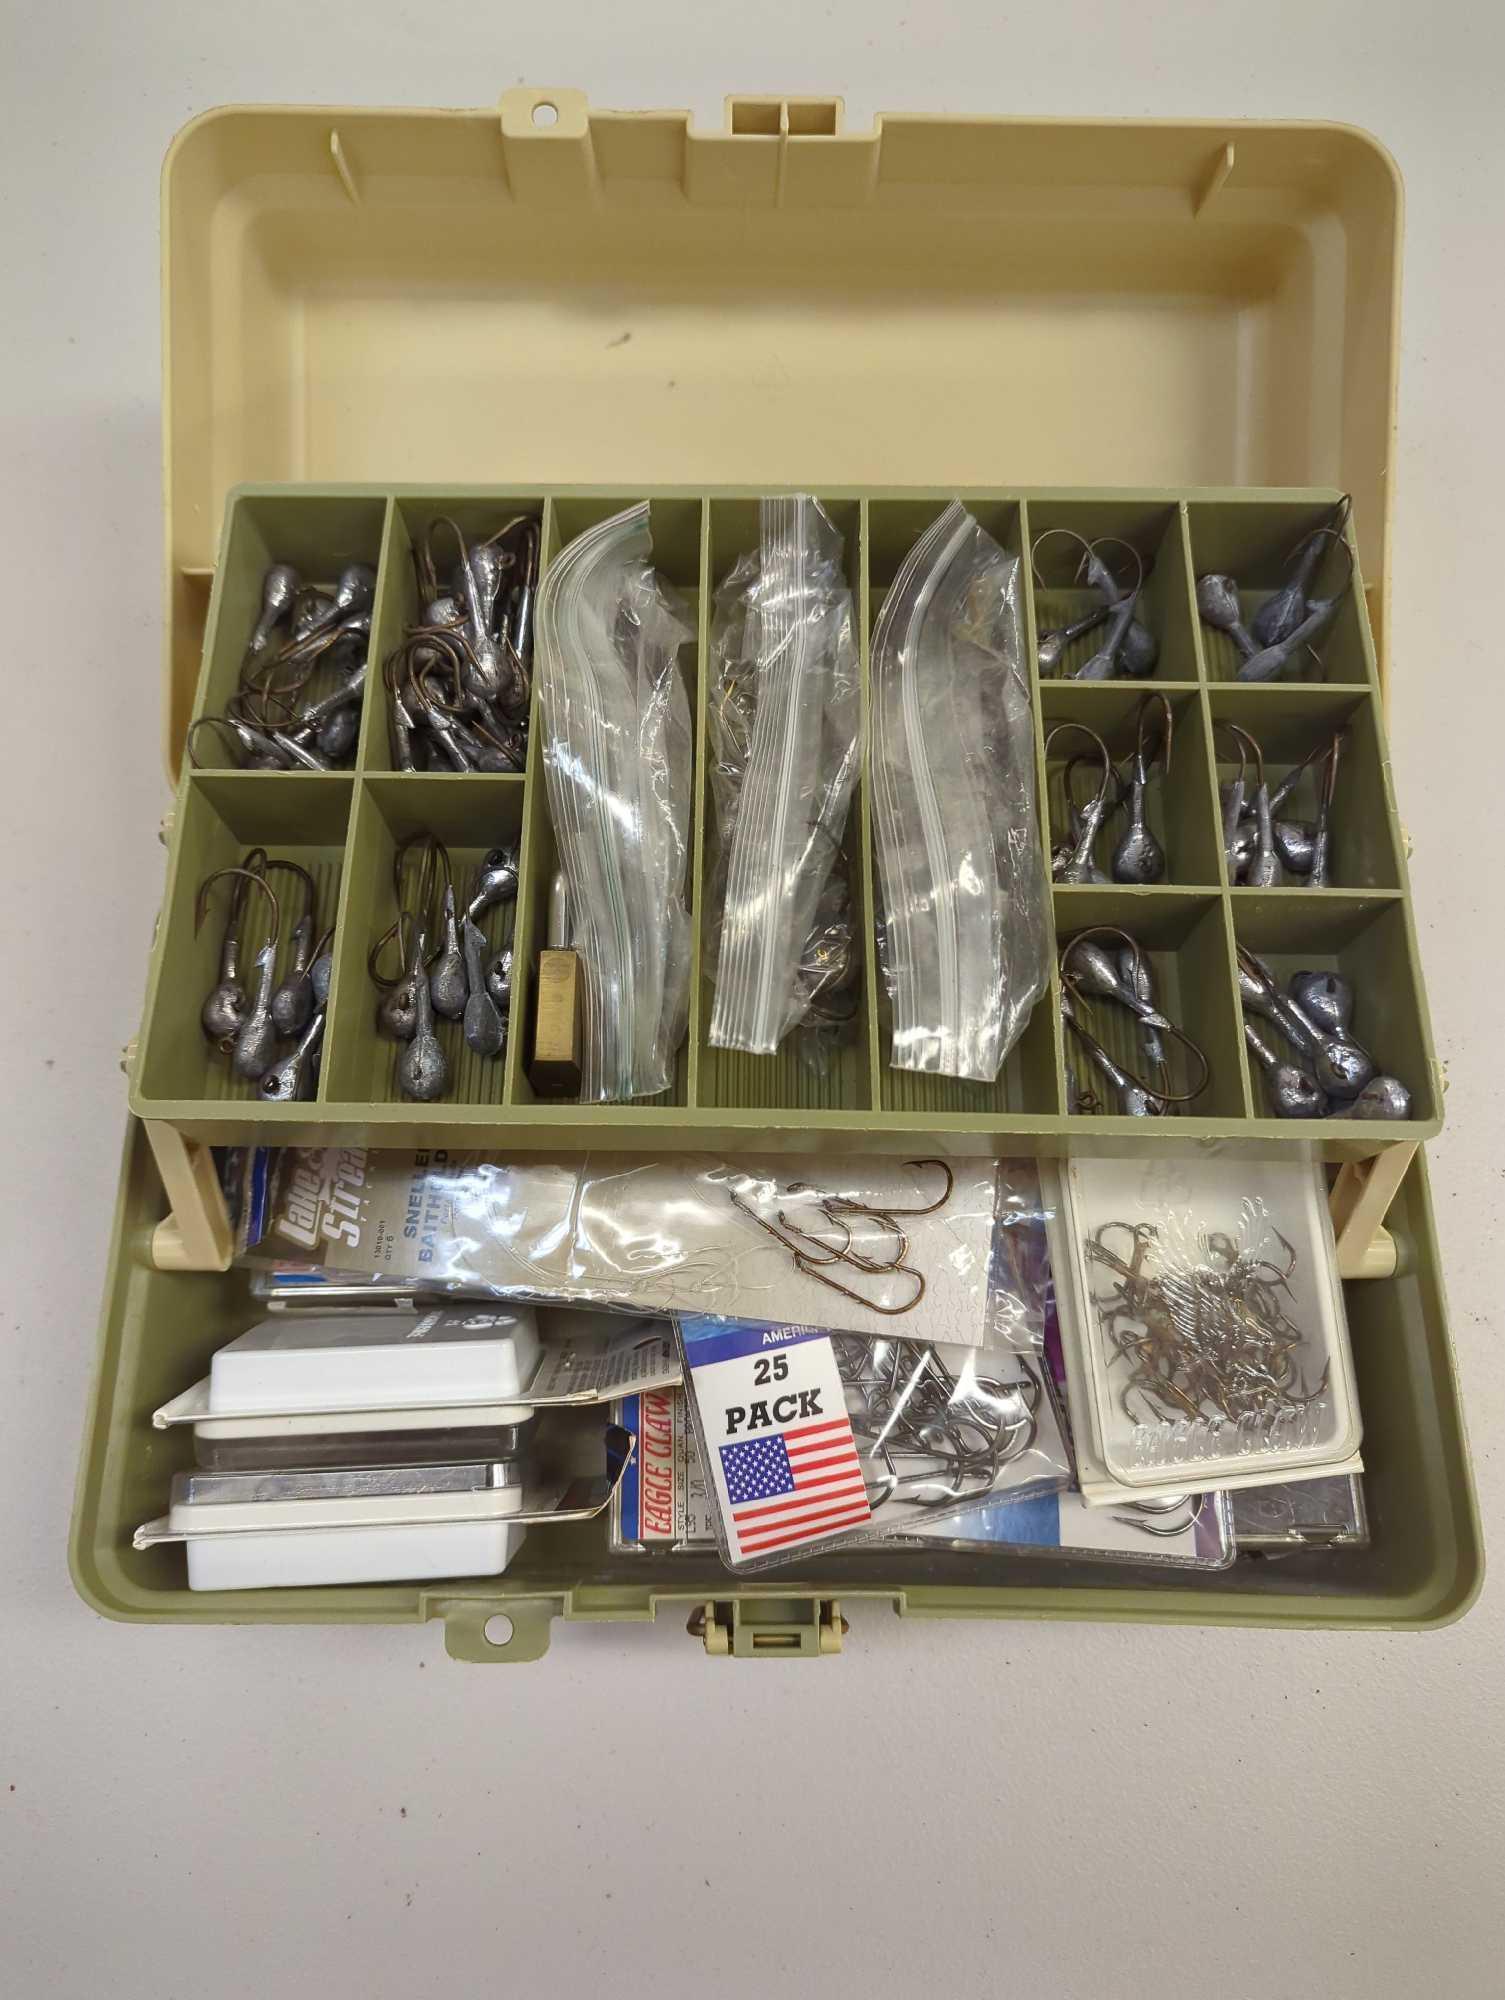 Tackle Box and contents including a variety of fishing hooks. Comes as is shown in photos. Appears